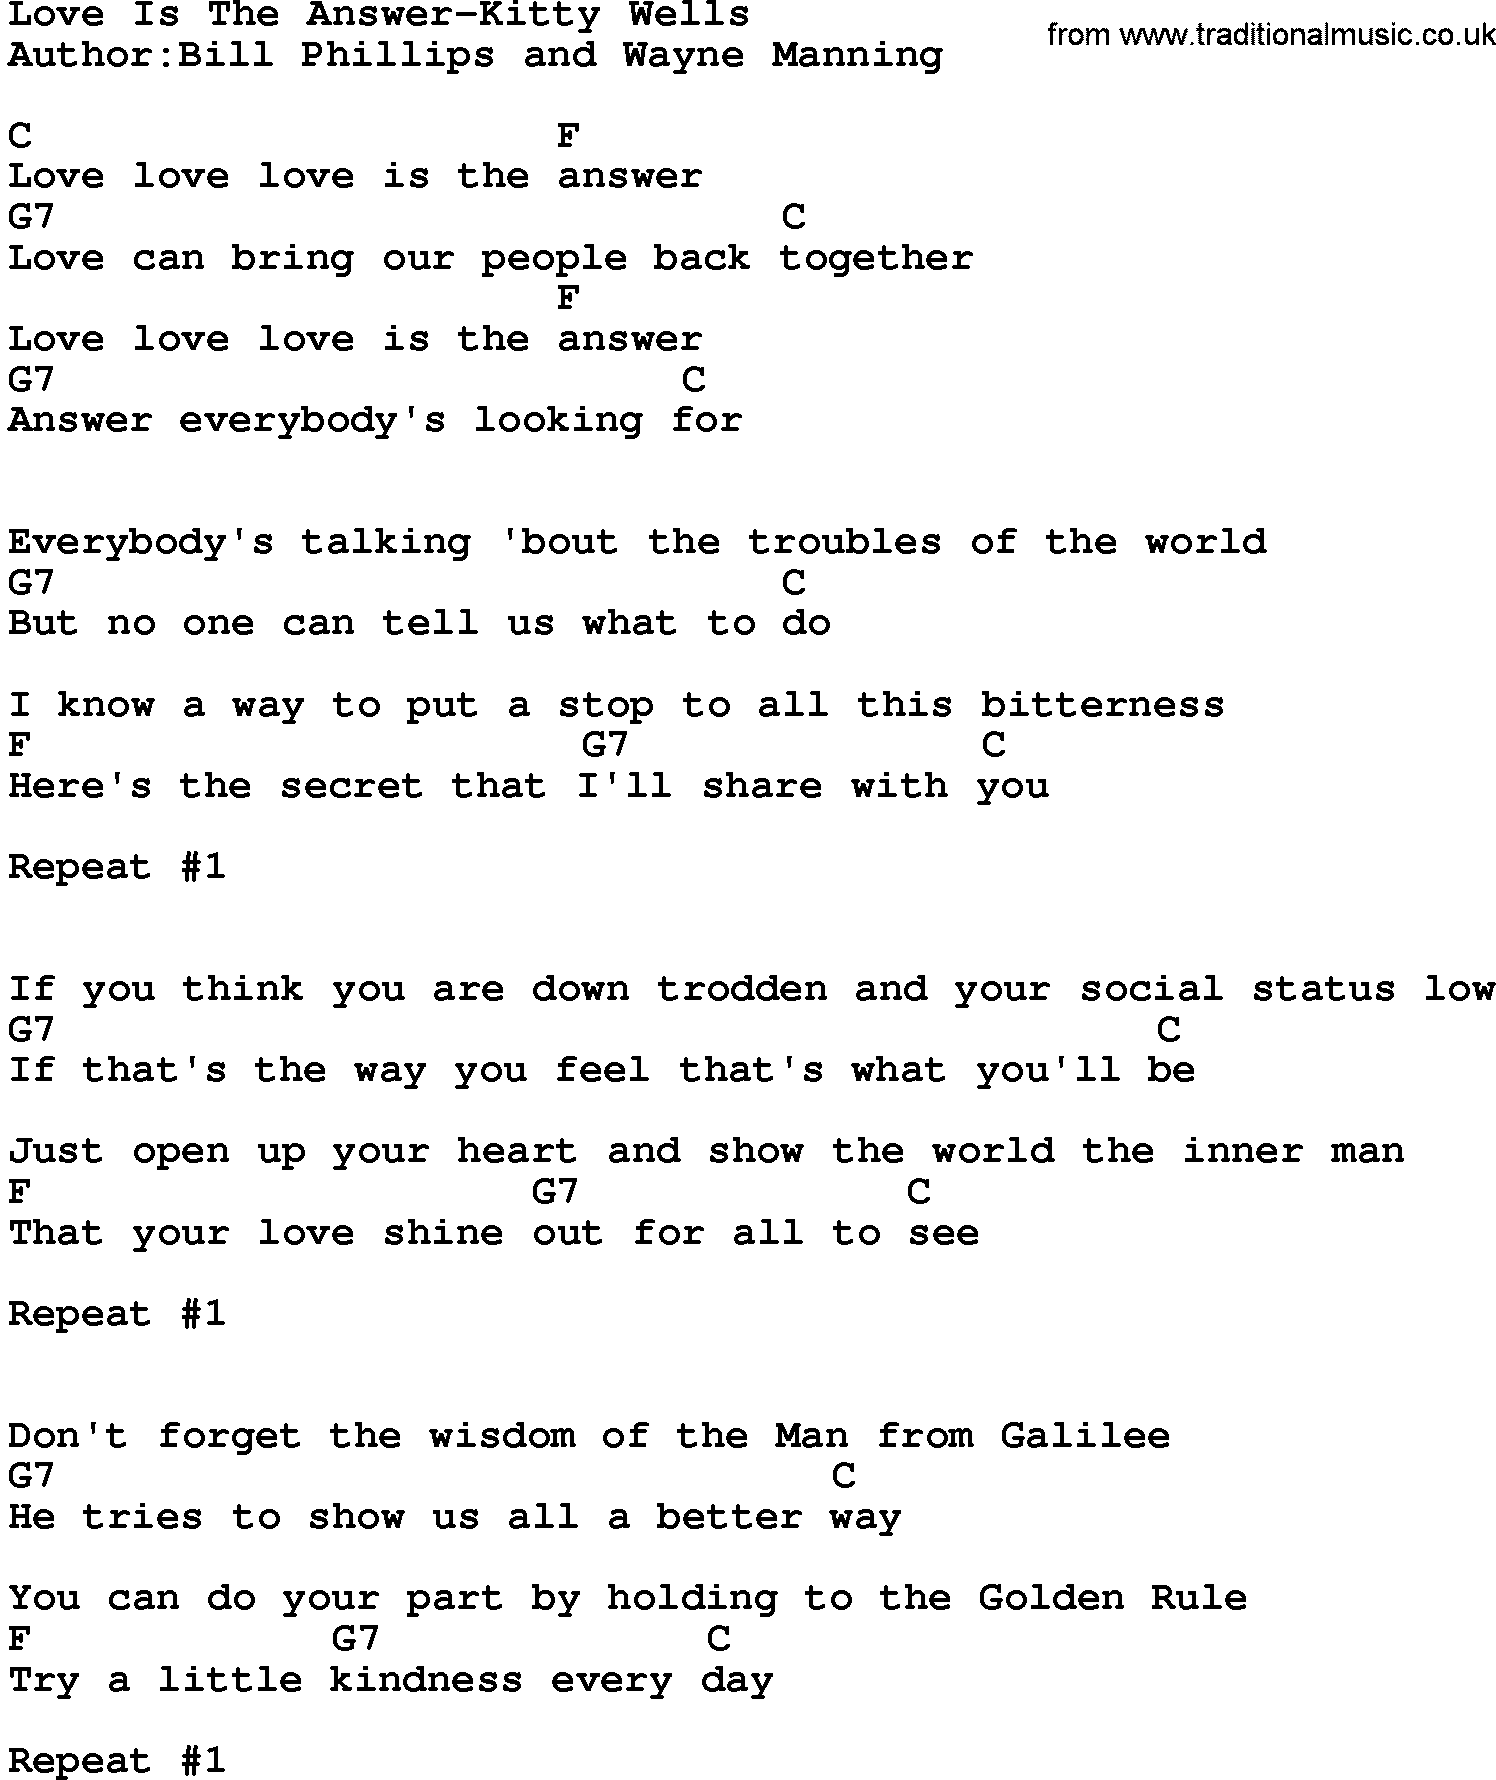 Country music song: Love Is The Answer-Kitty Wells lyrics and chords